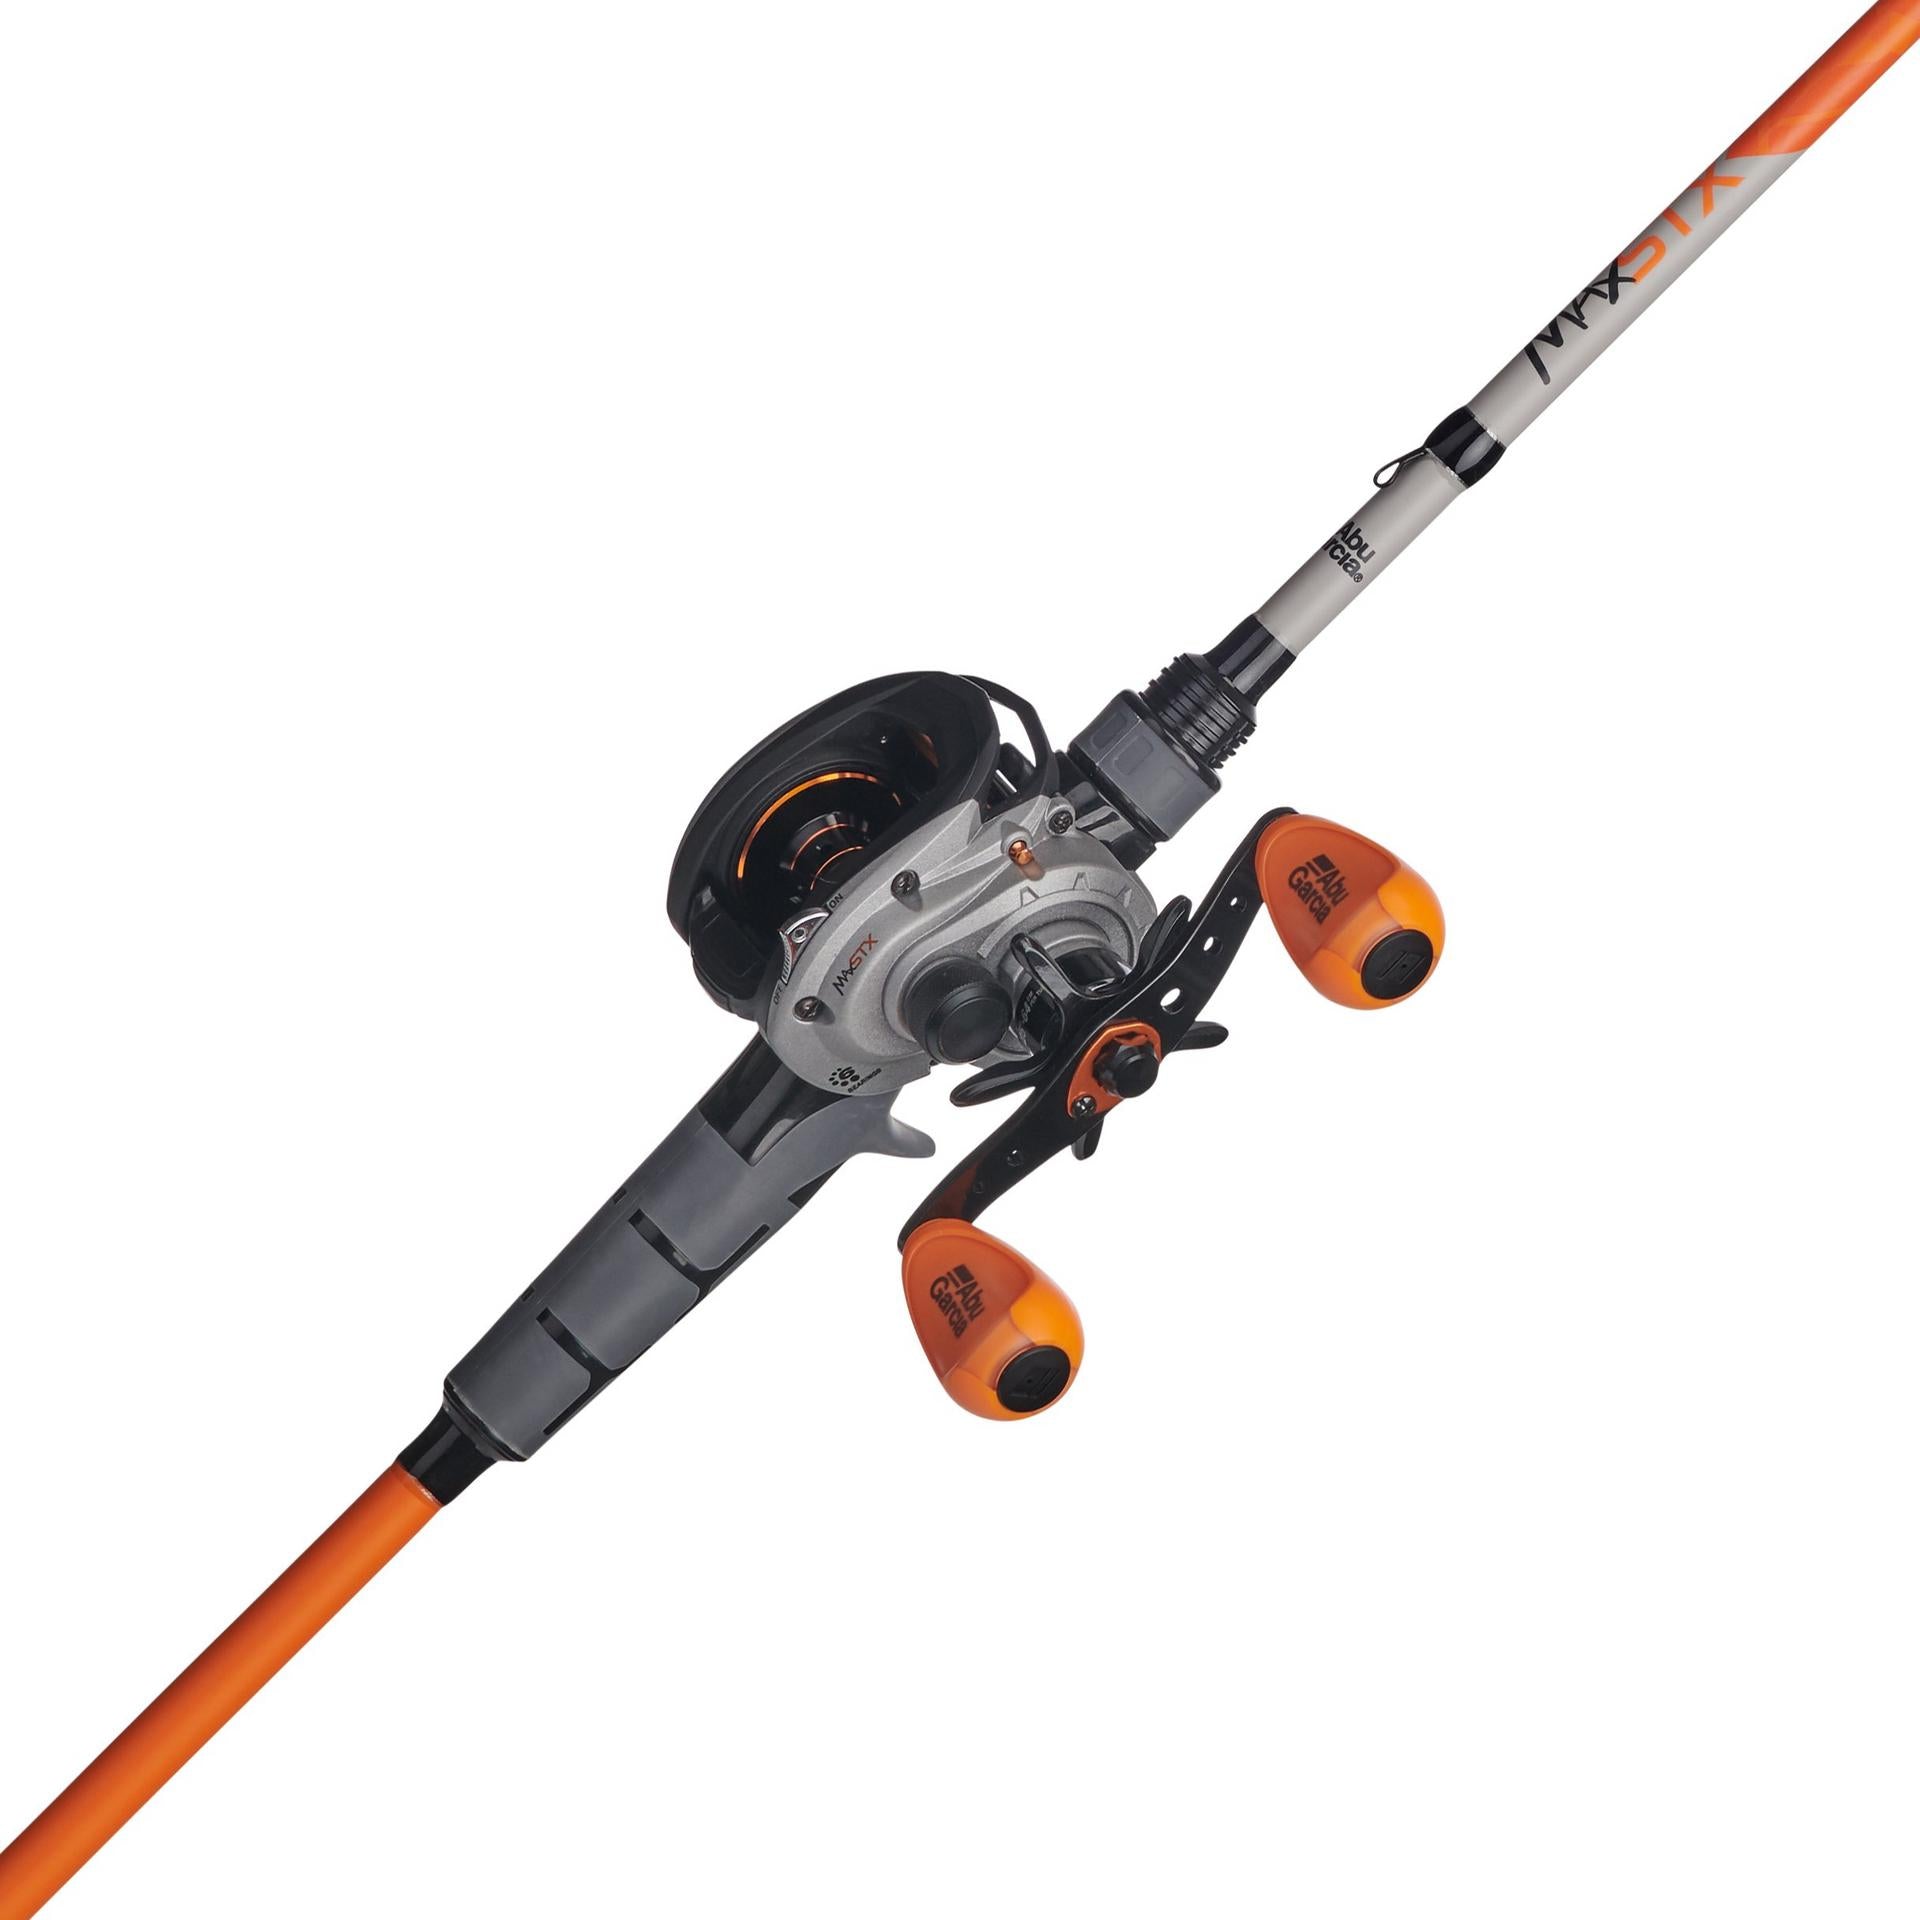 Before You Buy: Abu Garcia Max Pro Baitcaster Combo Product Review 